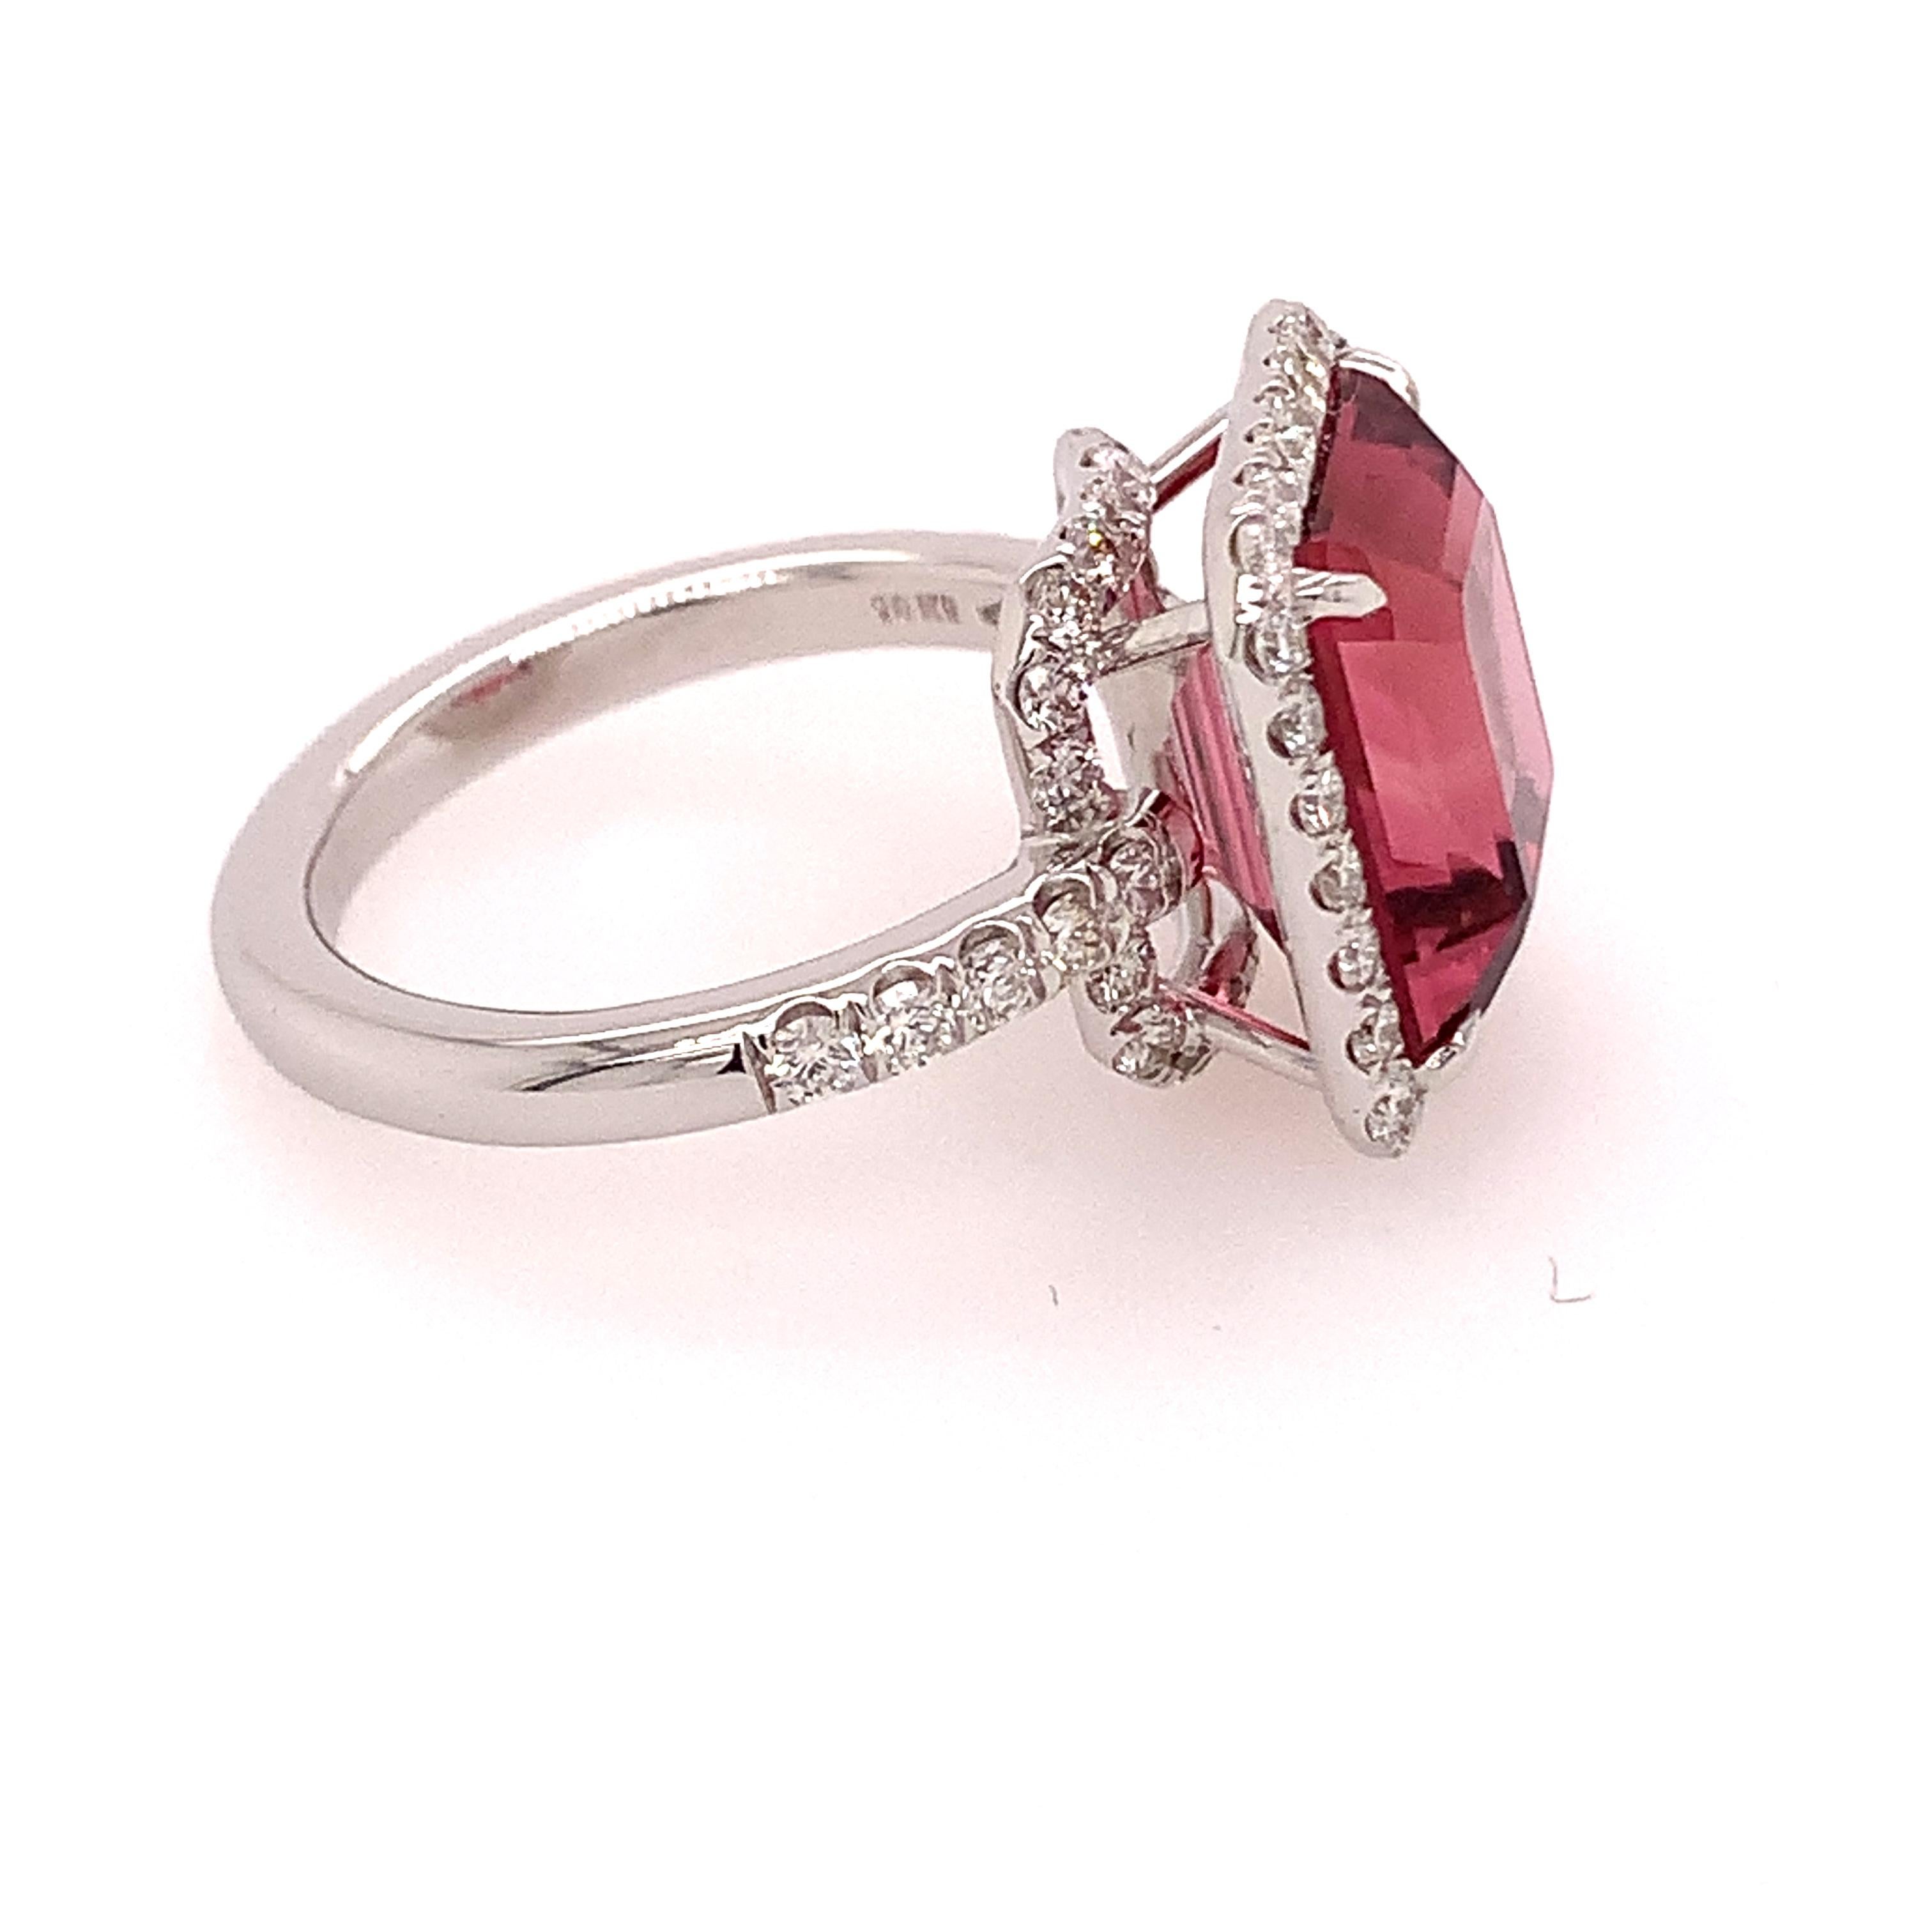 On sale on First Dibs only for 3 week.  This beautiful ring is a stunning piece created in Valenza.  18kt white gold grs 6,10  a beautiful square pink tourmaline ct 7,70 ,  and white diamonds  ct 1,09
Made In Italy in Valenza. 
Dont miss a special